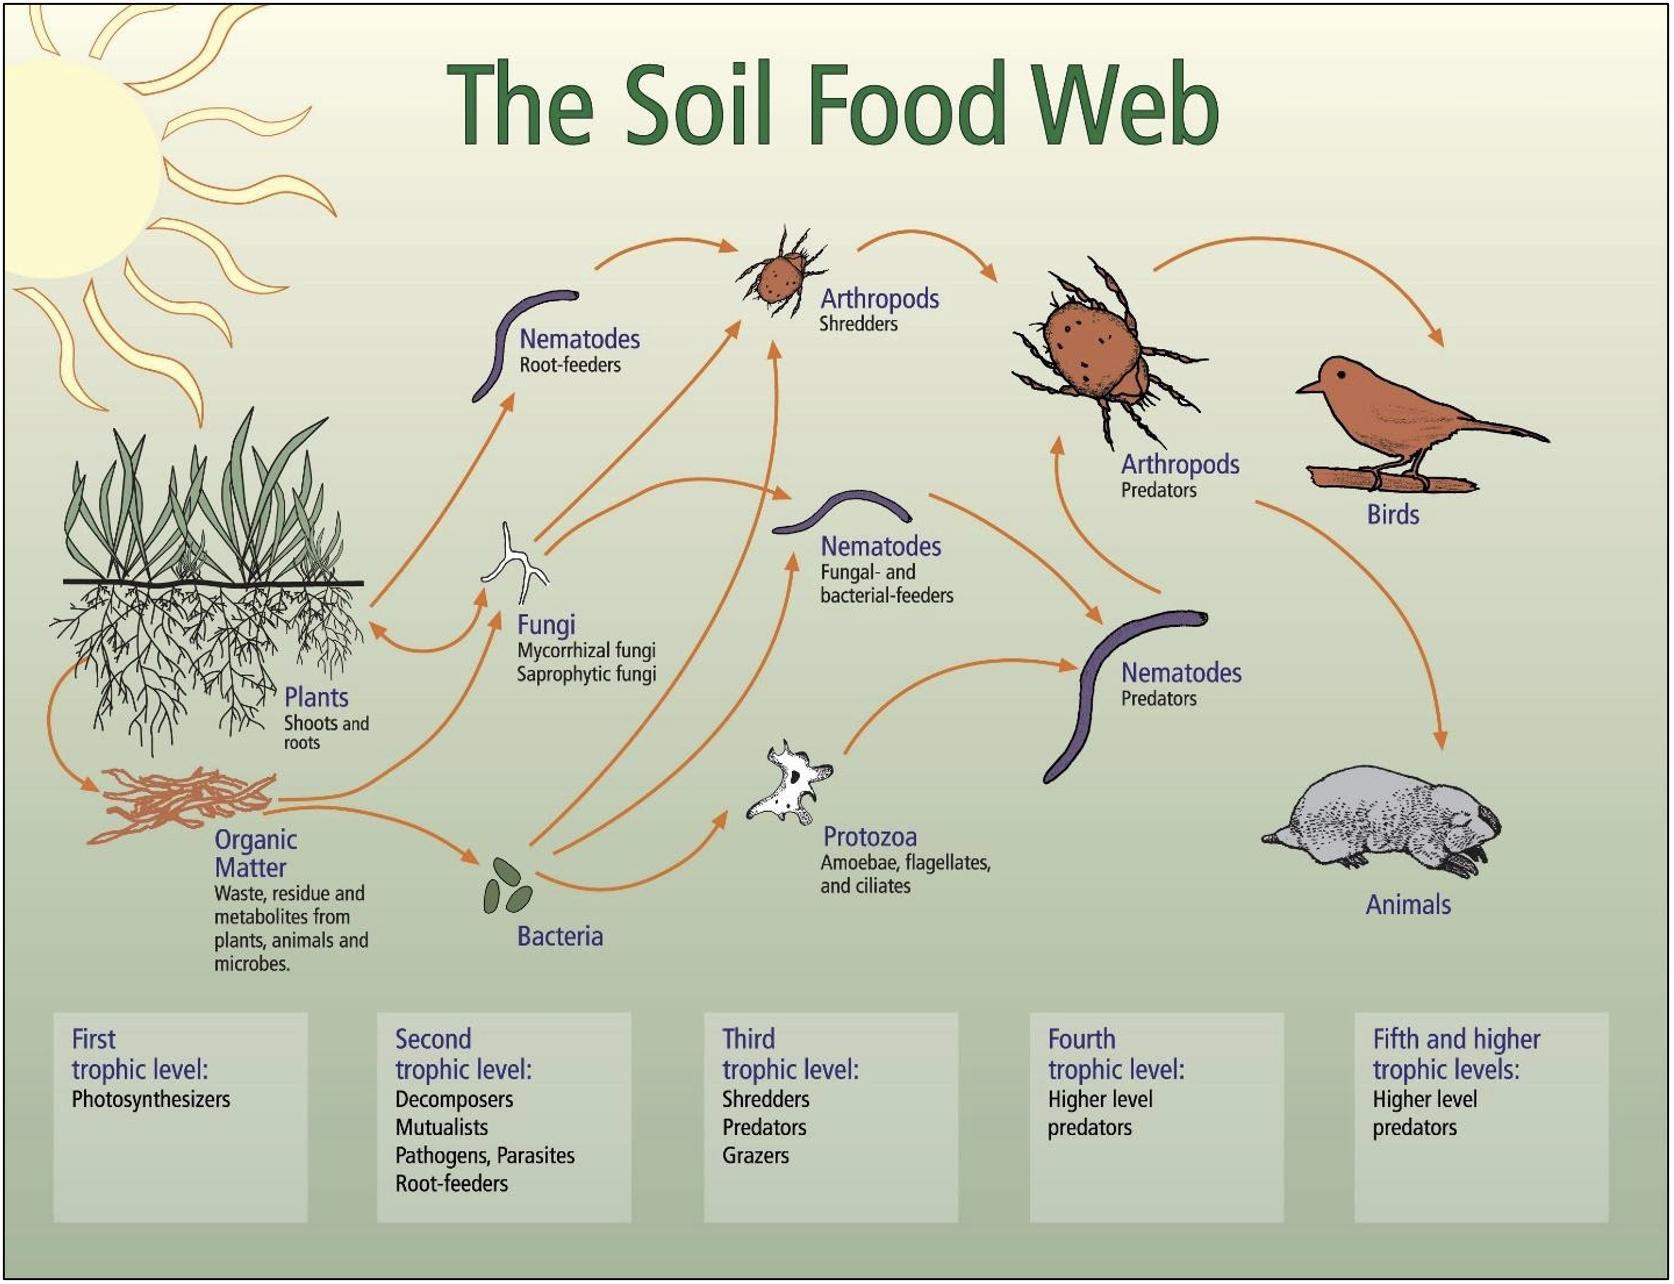 The Soil Food Web, listing all of the trophic levels from 1 to 5. First trophic level: Photosynthesizers such as plants and organic matter. Second Trophic level: Bacteria, Fungi, Nematodes. Third trophic level: Arthropods, Nematodes, Protozoa. Fourth trophic level: Arthropods(predators), nematodes (predators). Fifth and higher trophic levels: Animals and Birds